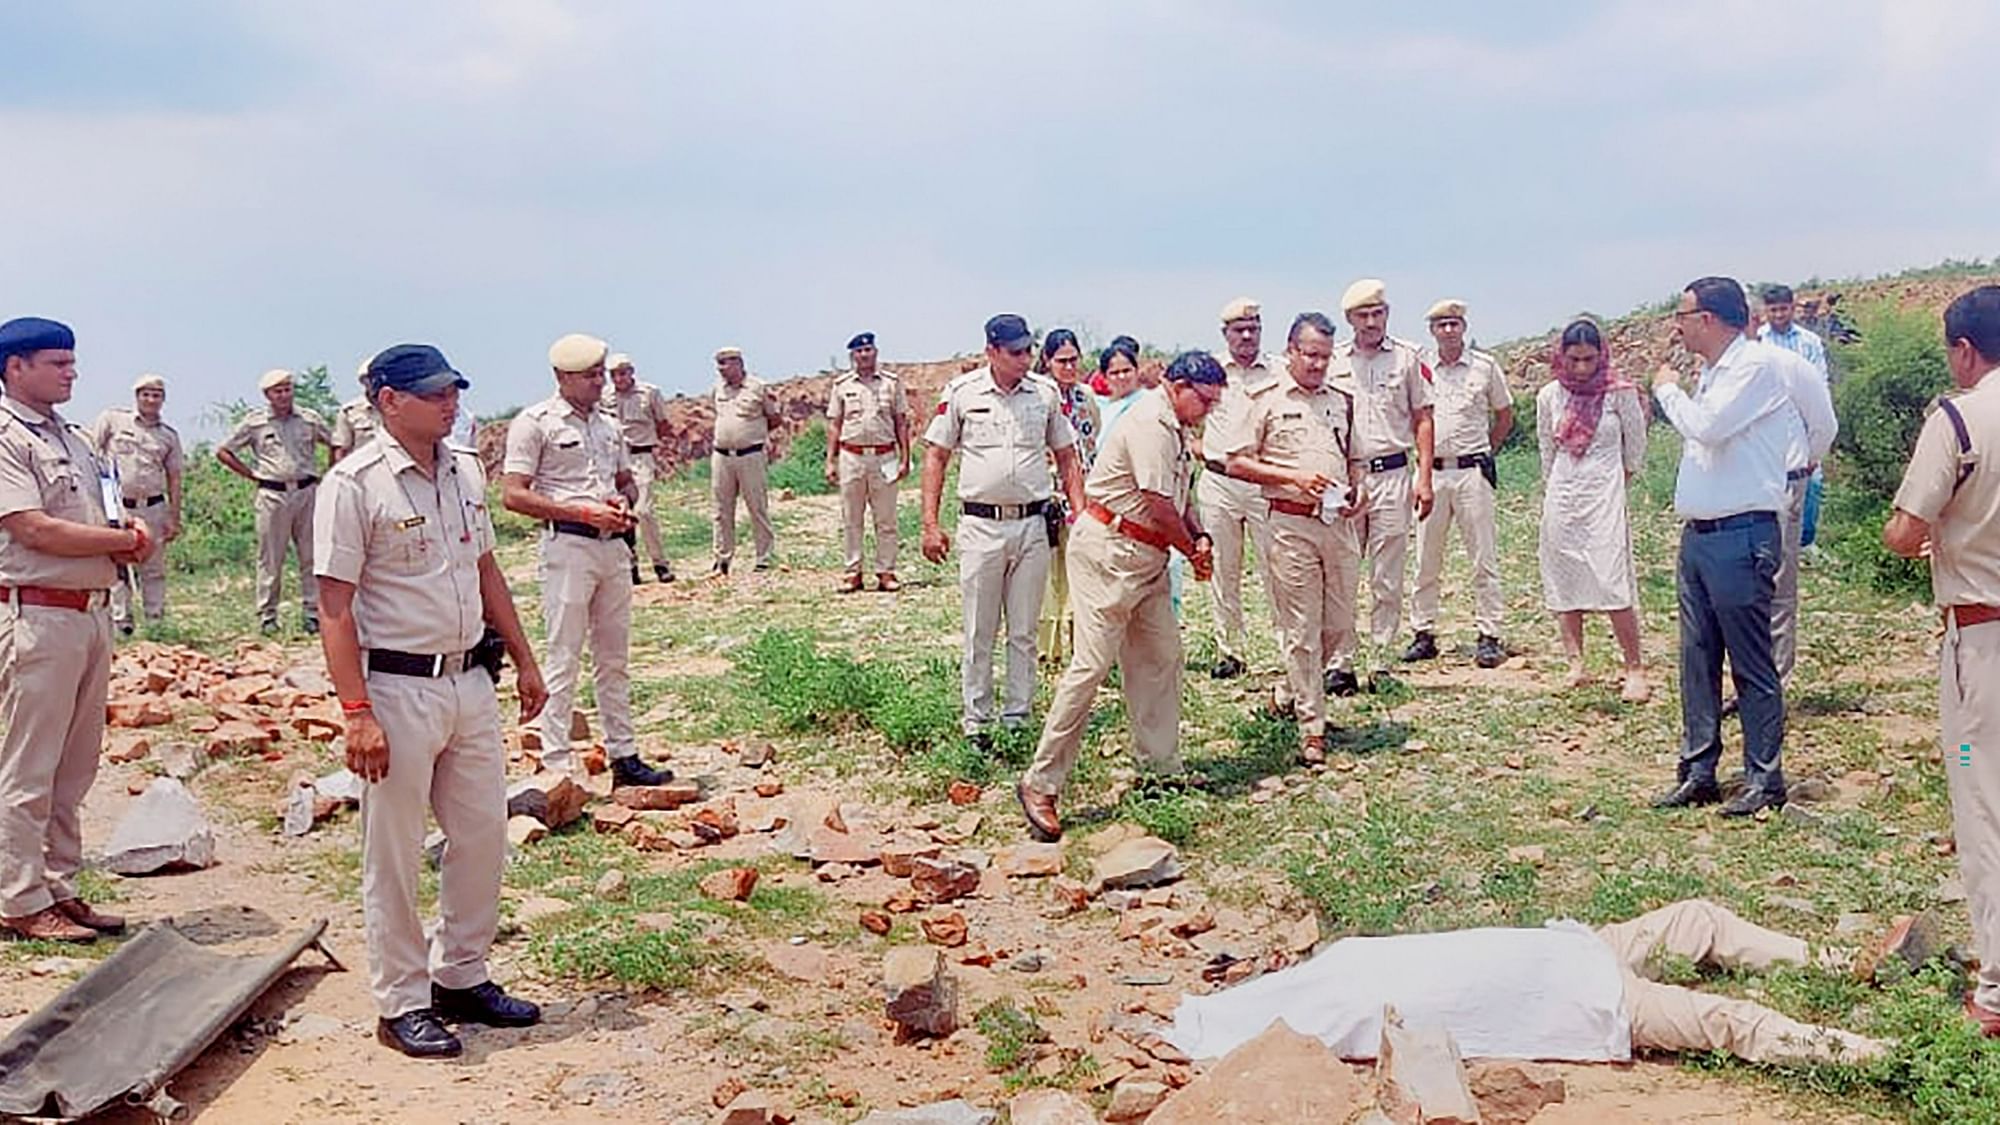 <div class="paragraphs"><p>Two days after a police officer <a href="https://www.thequint.com/news/india/haryana-police-arrest-truck-driver-mowed-down-haryana-dsp-surender-singh-mining-mafia">was killed</a> while probing illegal stone mining in Haryana's Nuh, the state government on Thursday, 21 July, announced that it has ordered a judicial inquiry into the matter.</p></div>